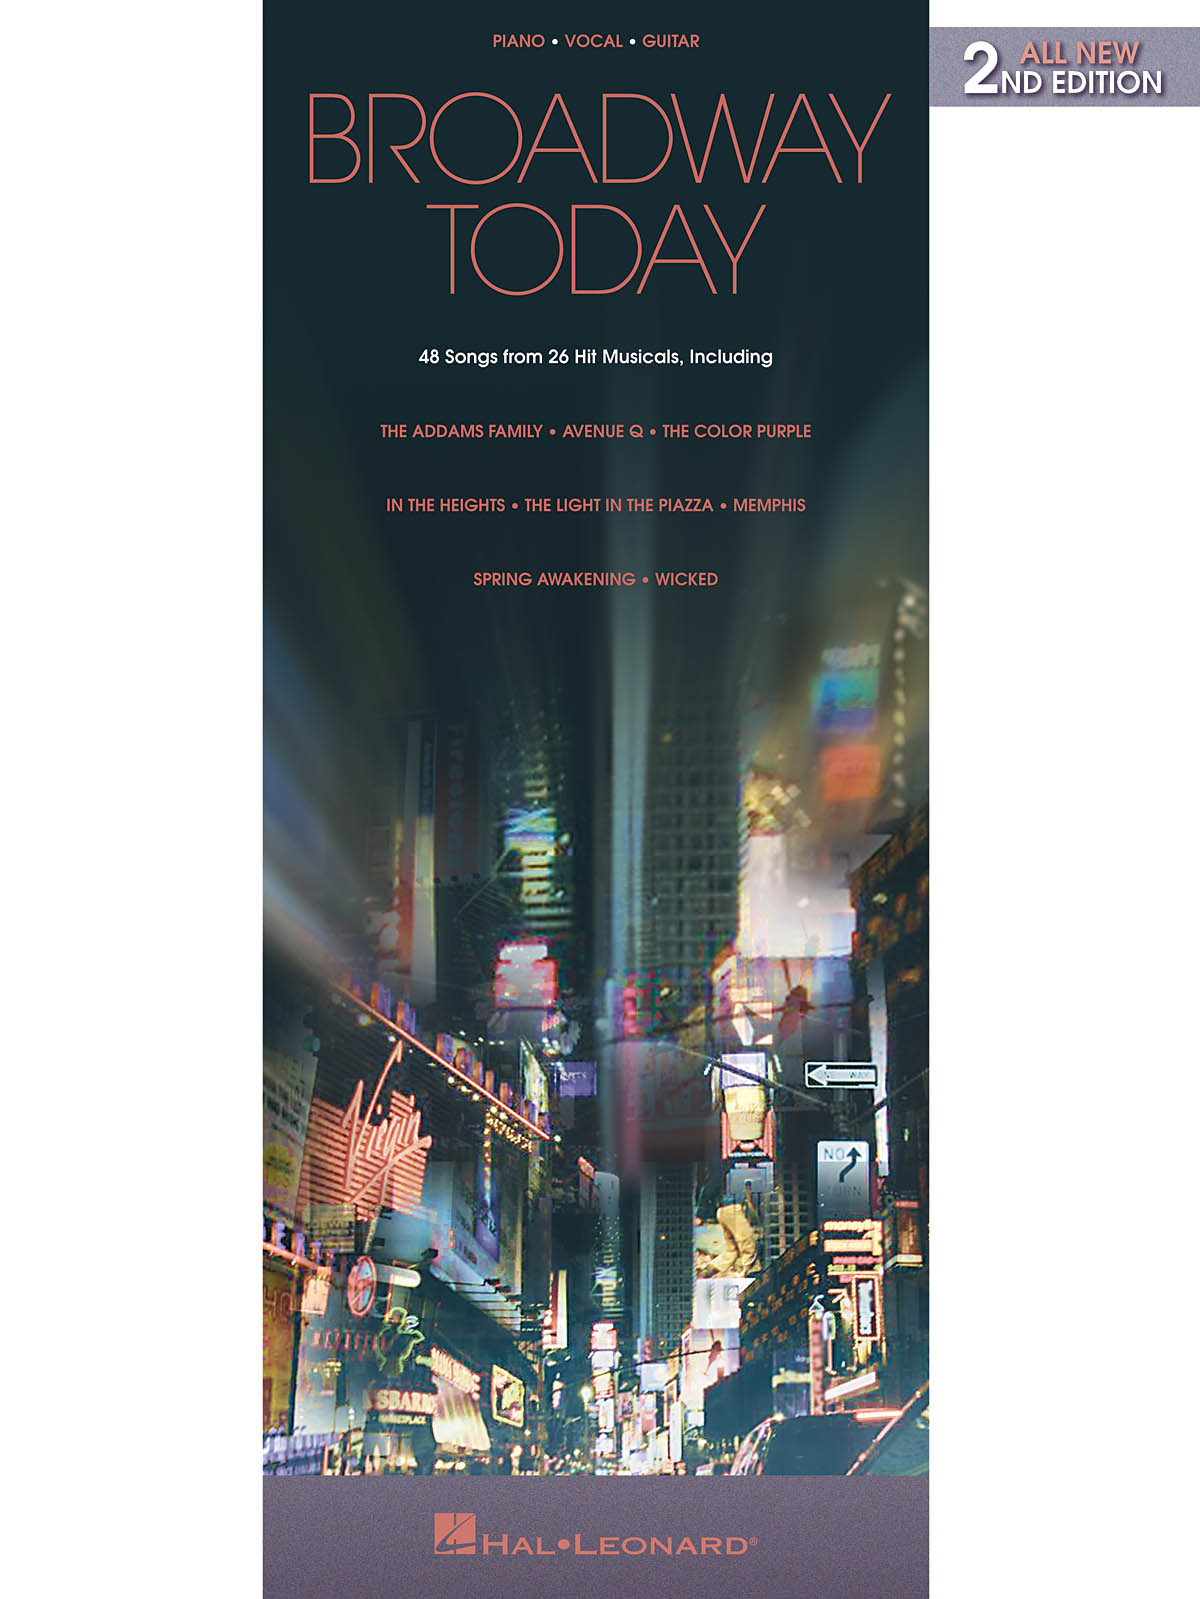 Broadway Today - All-New 2nd Edition: Piano  Vocal and Guitar